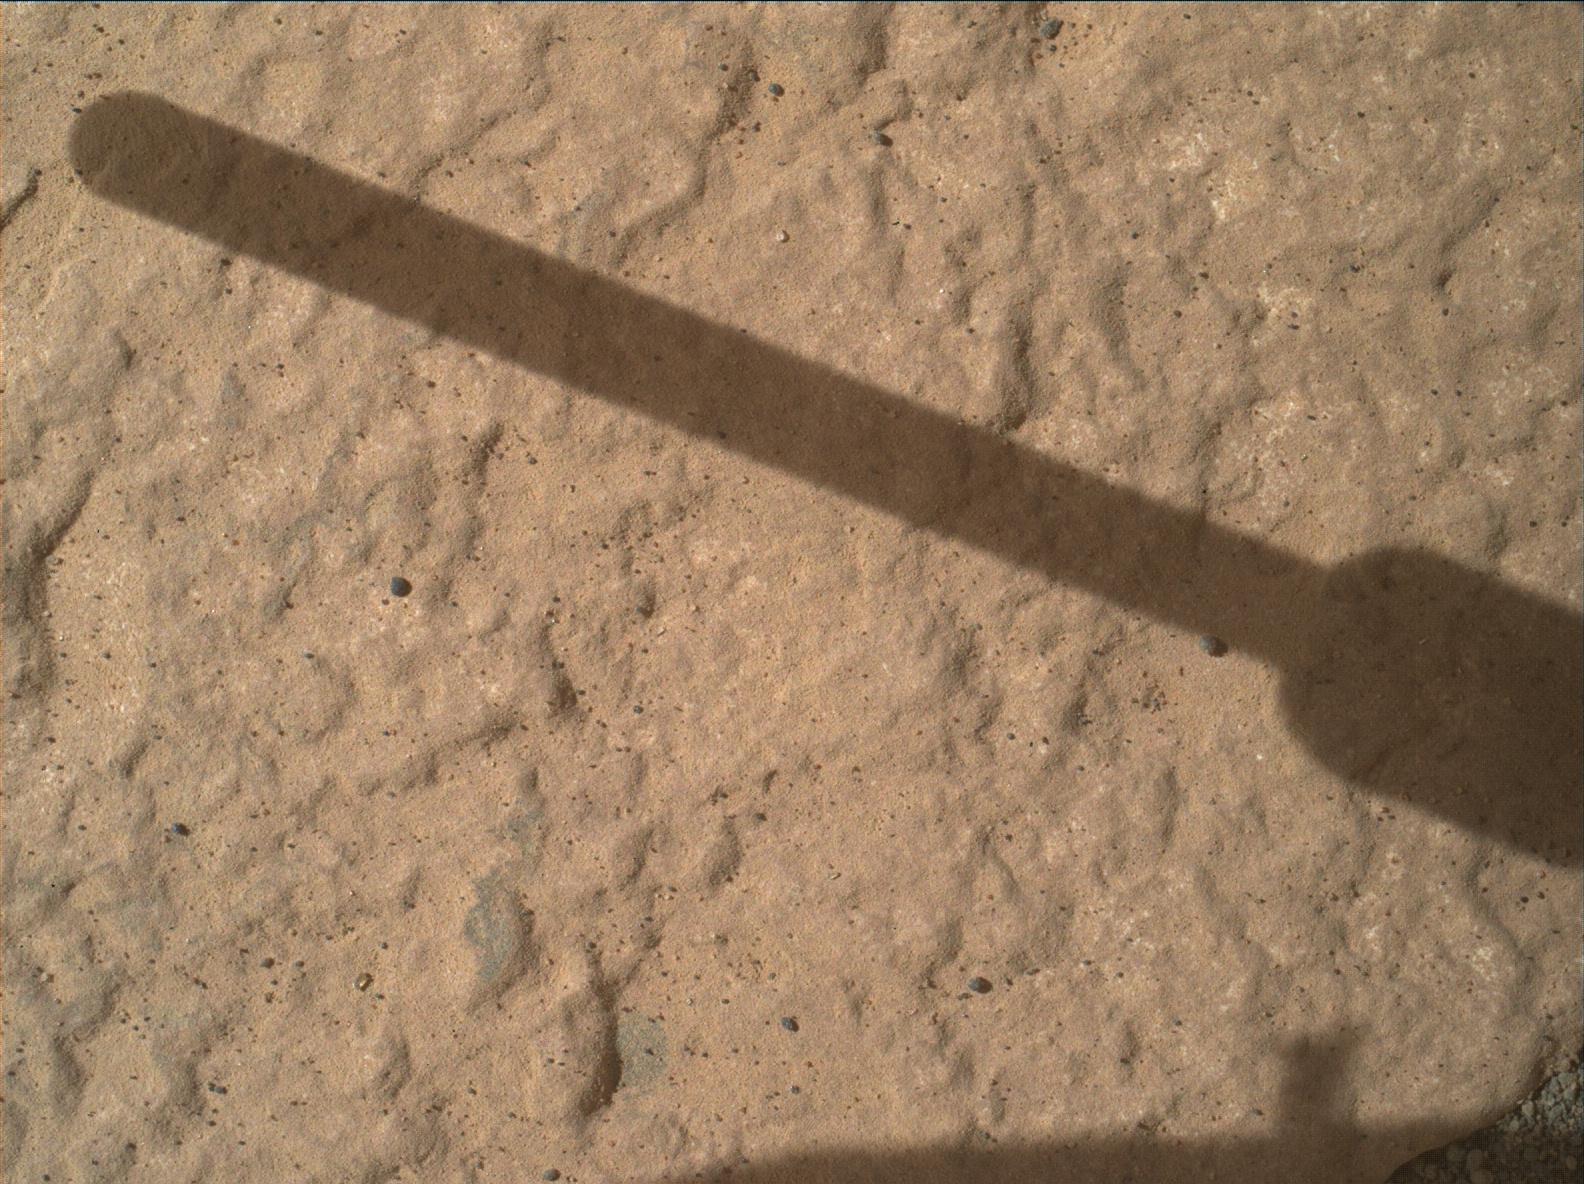 Nasa's Mars rover Curiosity acquired this image using its Mars Hand Lens Imager (MAHLI) on Sol 1784